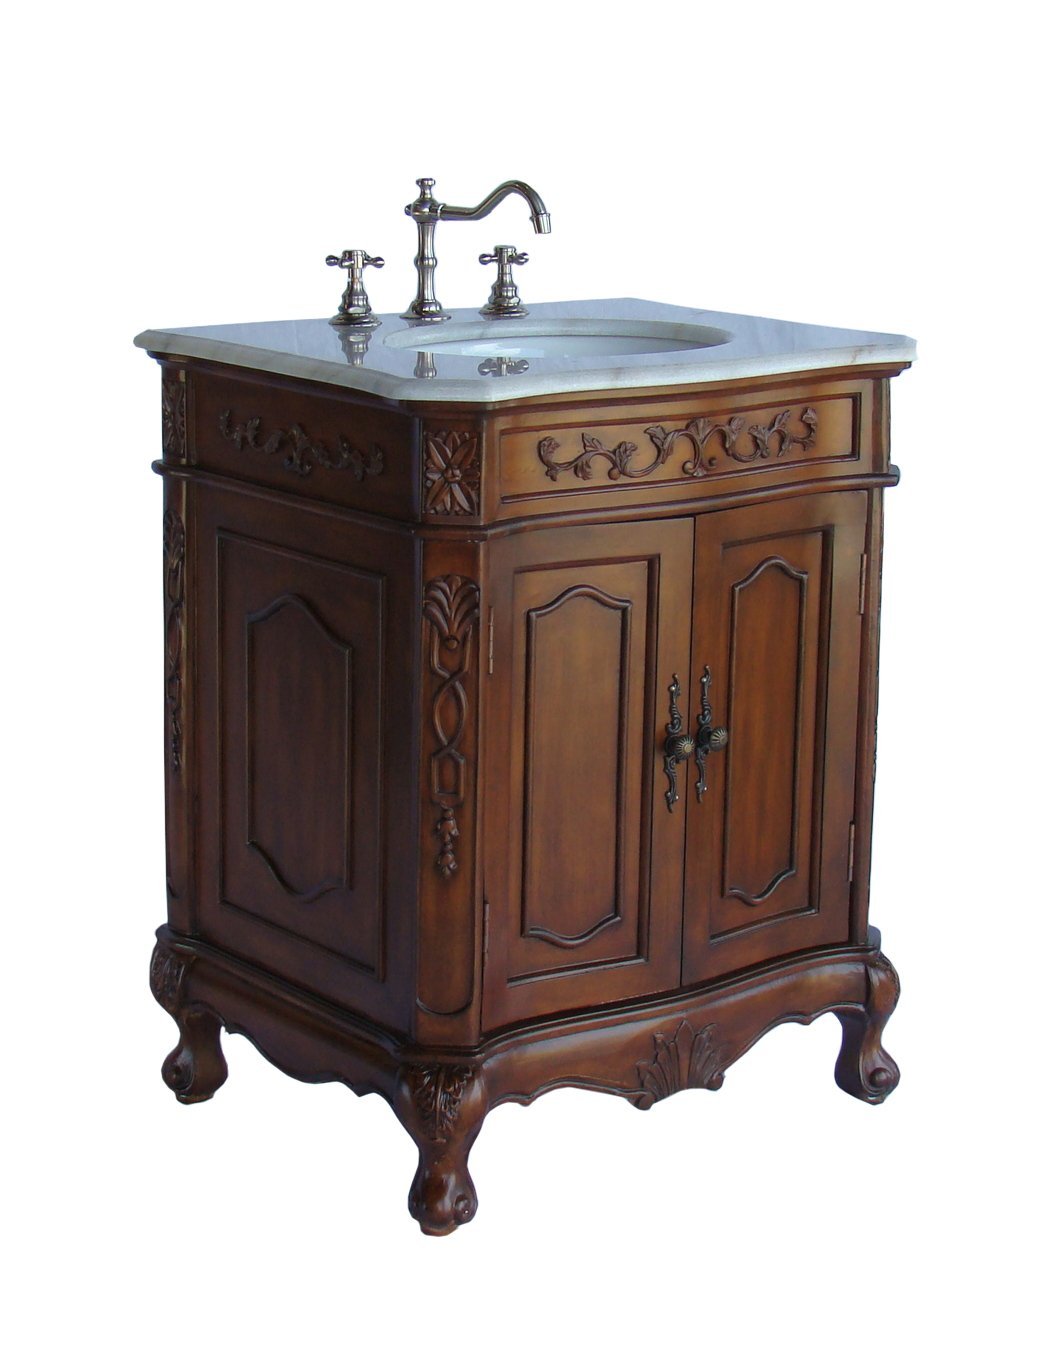 Antique Furniture Bath VANITY - Beautiful Wood Finish - 67 to 72 -  Converted For Bathroom Sink! Victorian French Country Any Style